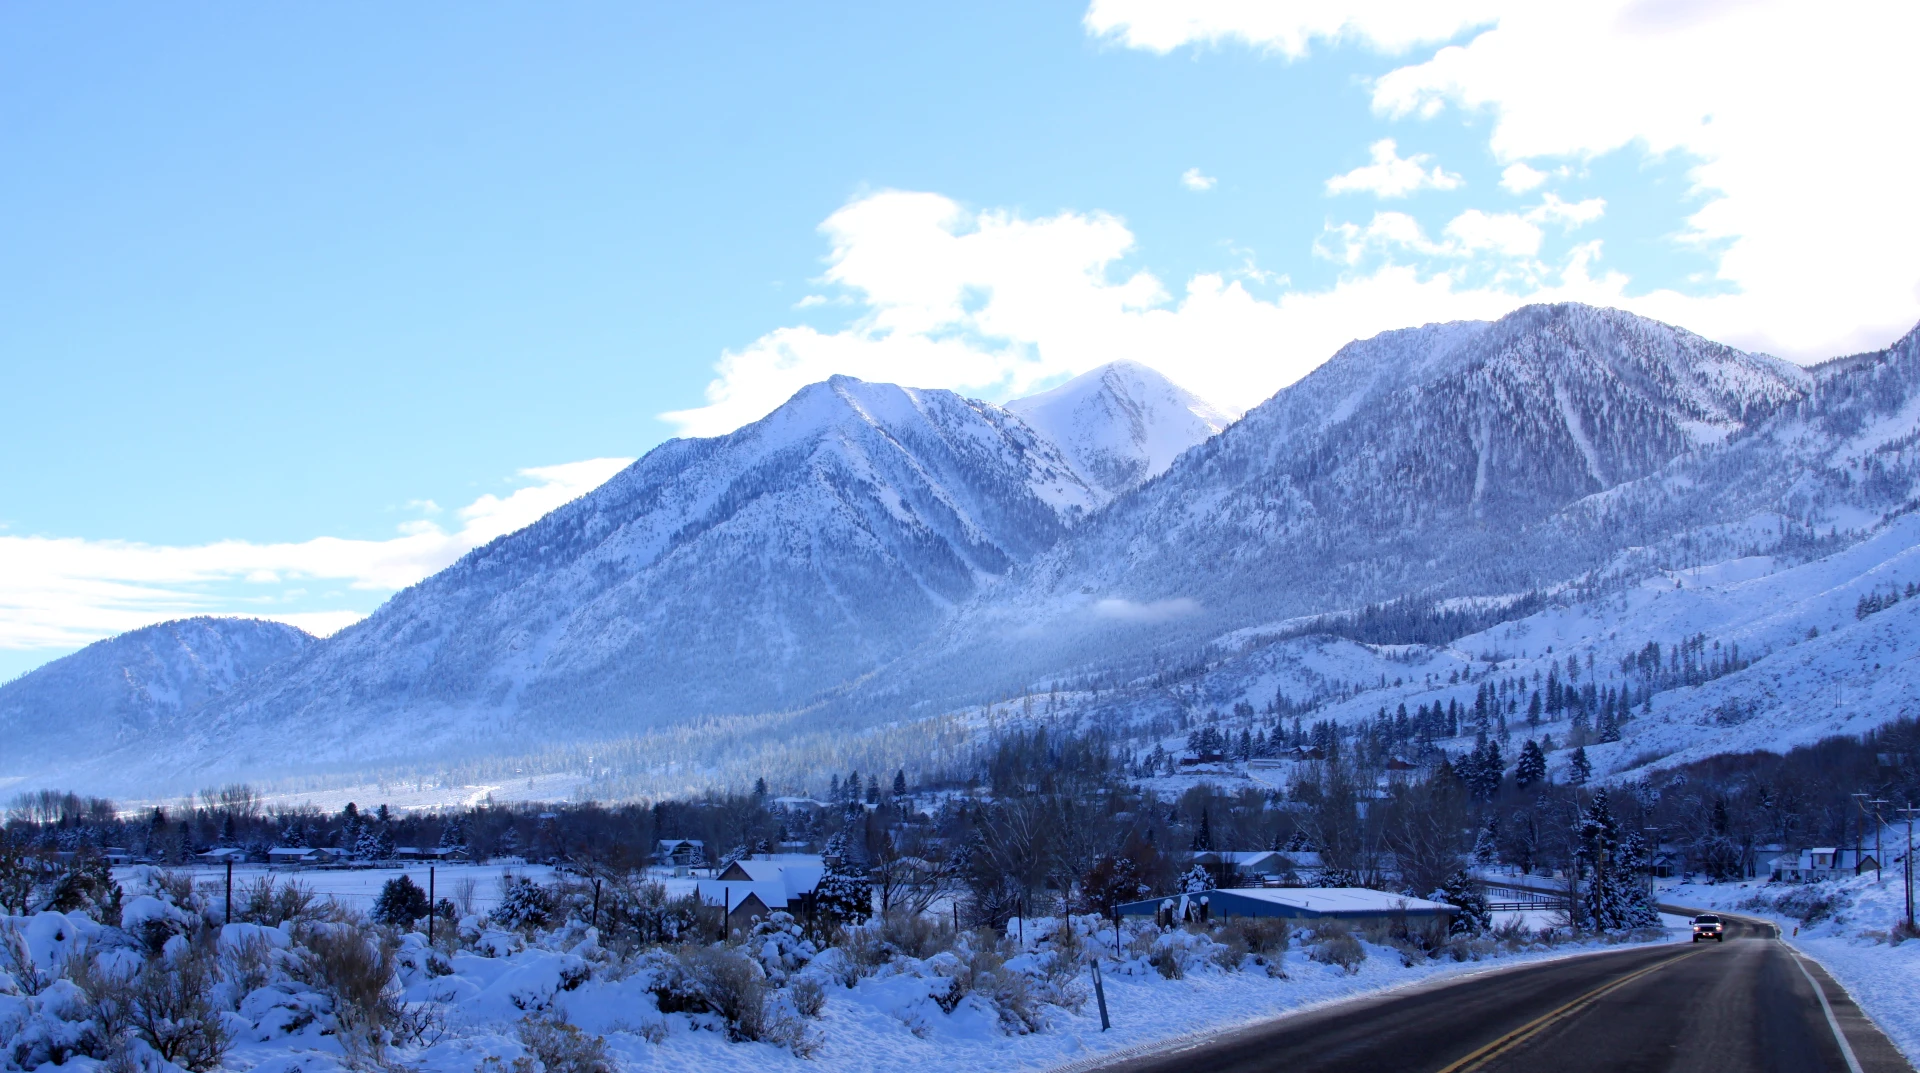 The Carson Valley snow-covered peaks